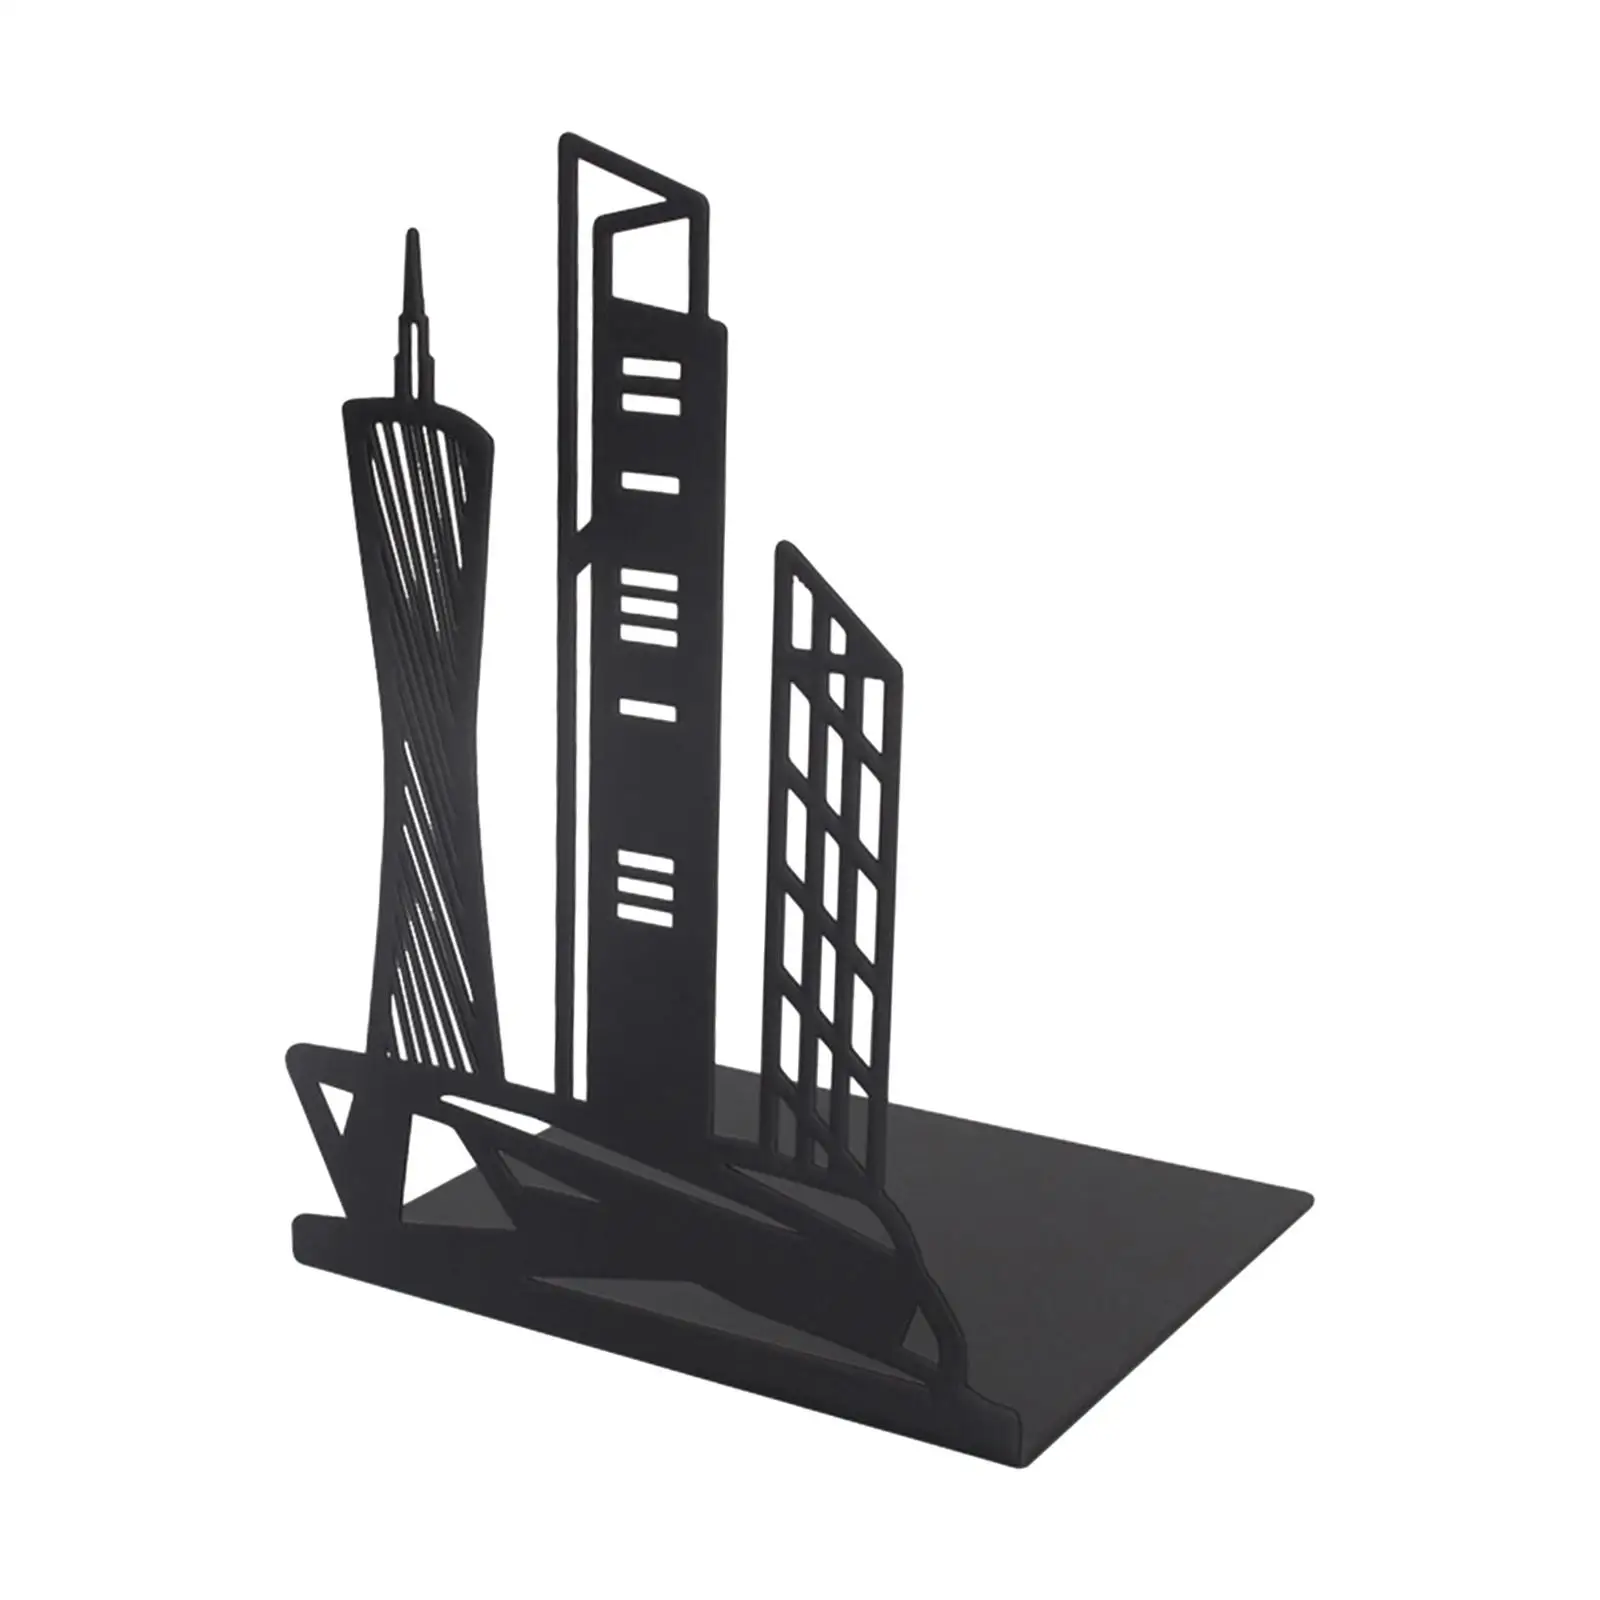 Bookends Famous Architecture Iron Art Black Book Ends 17x11x10cm Multipurpose Hollowed Out for Office Kitchen Accessories Sturdy